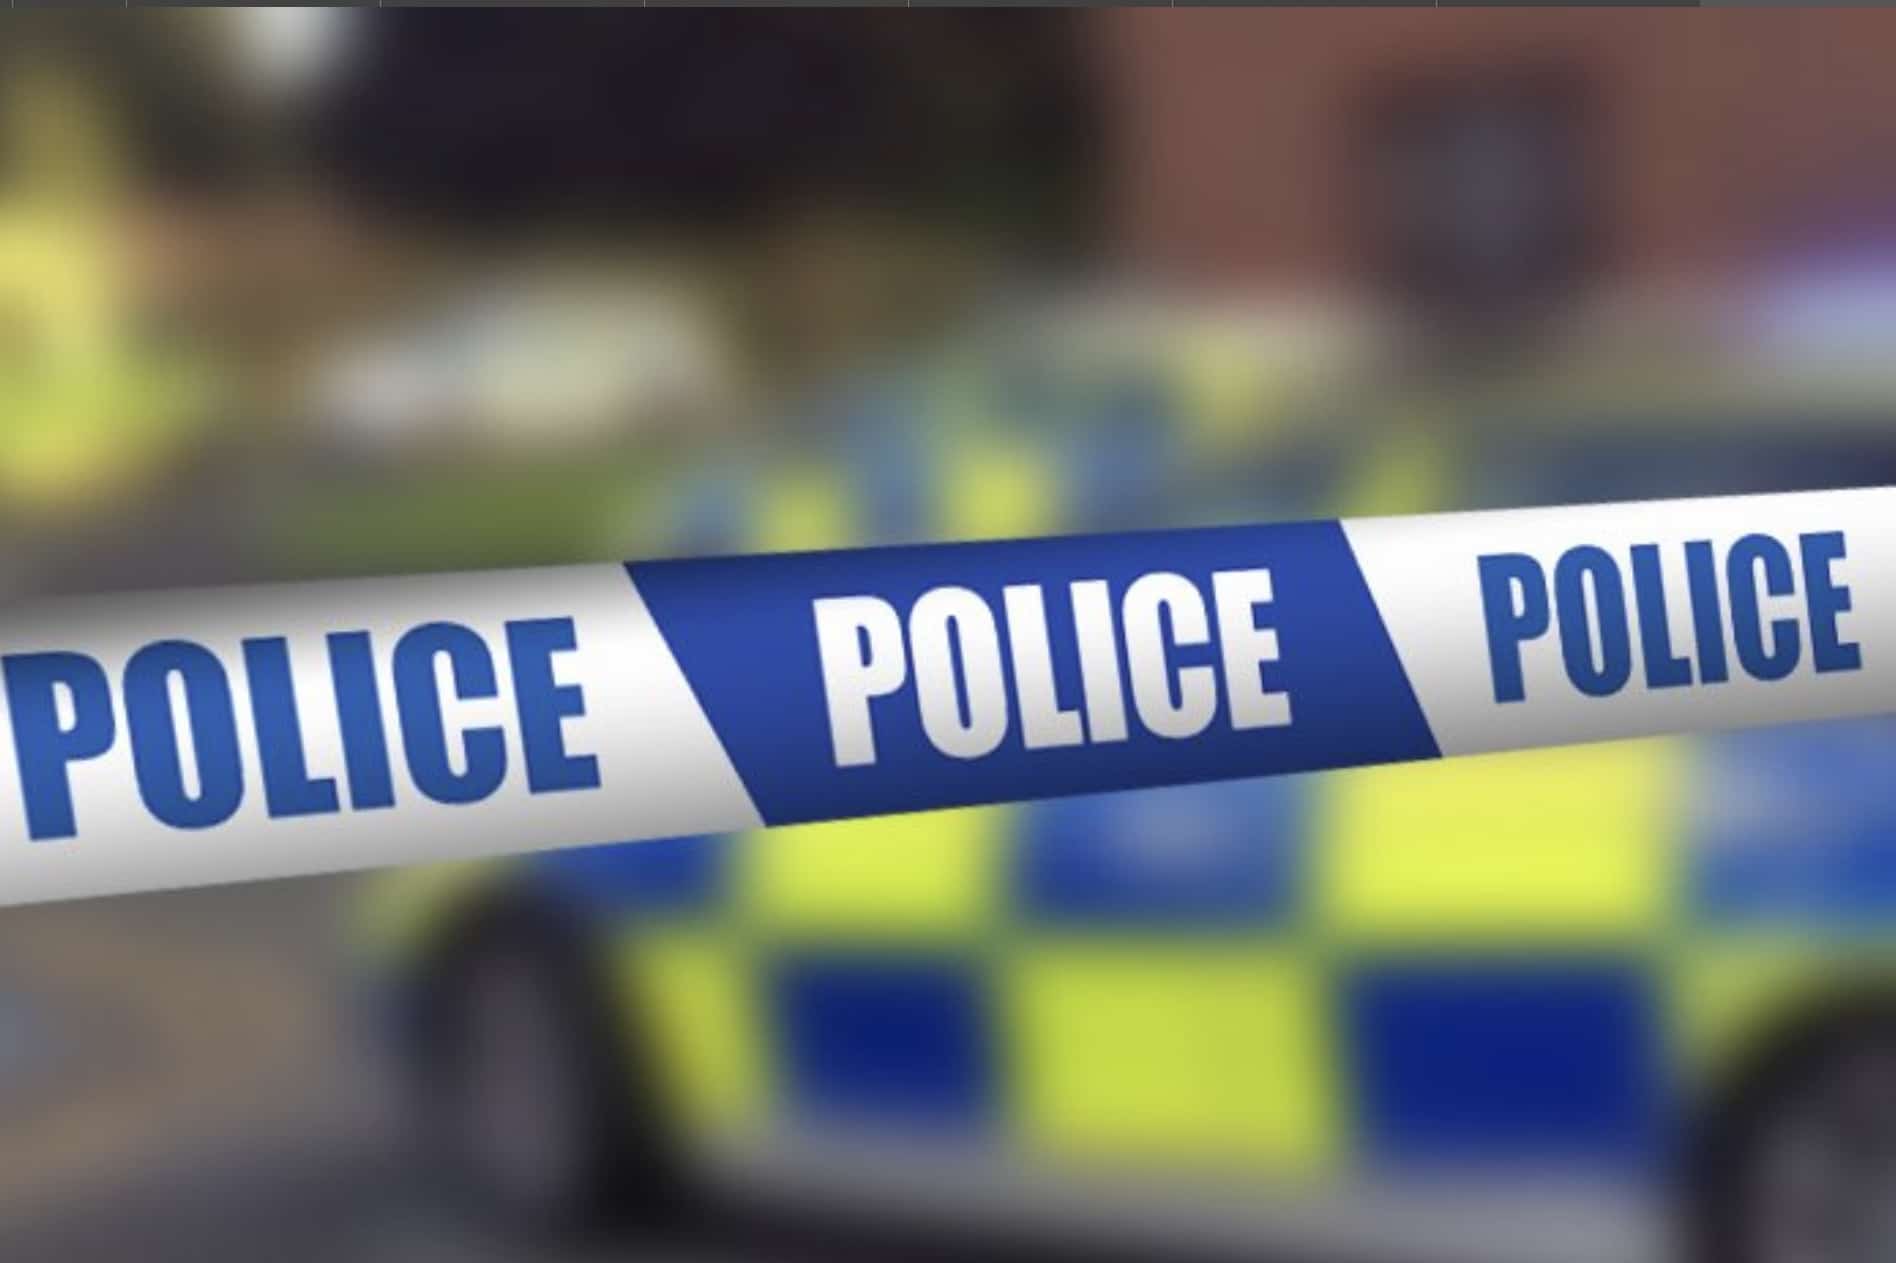 Man charged with assault following incident in Sturminster Newton 